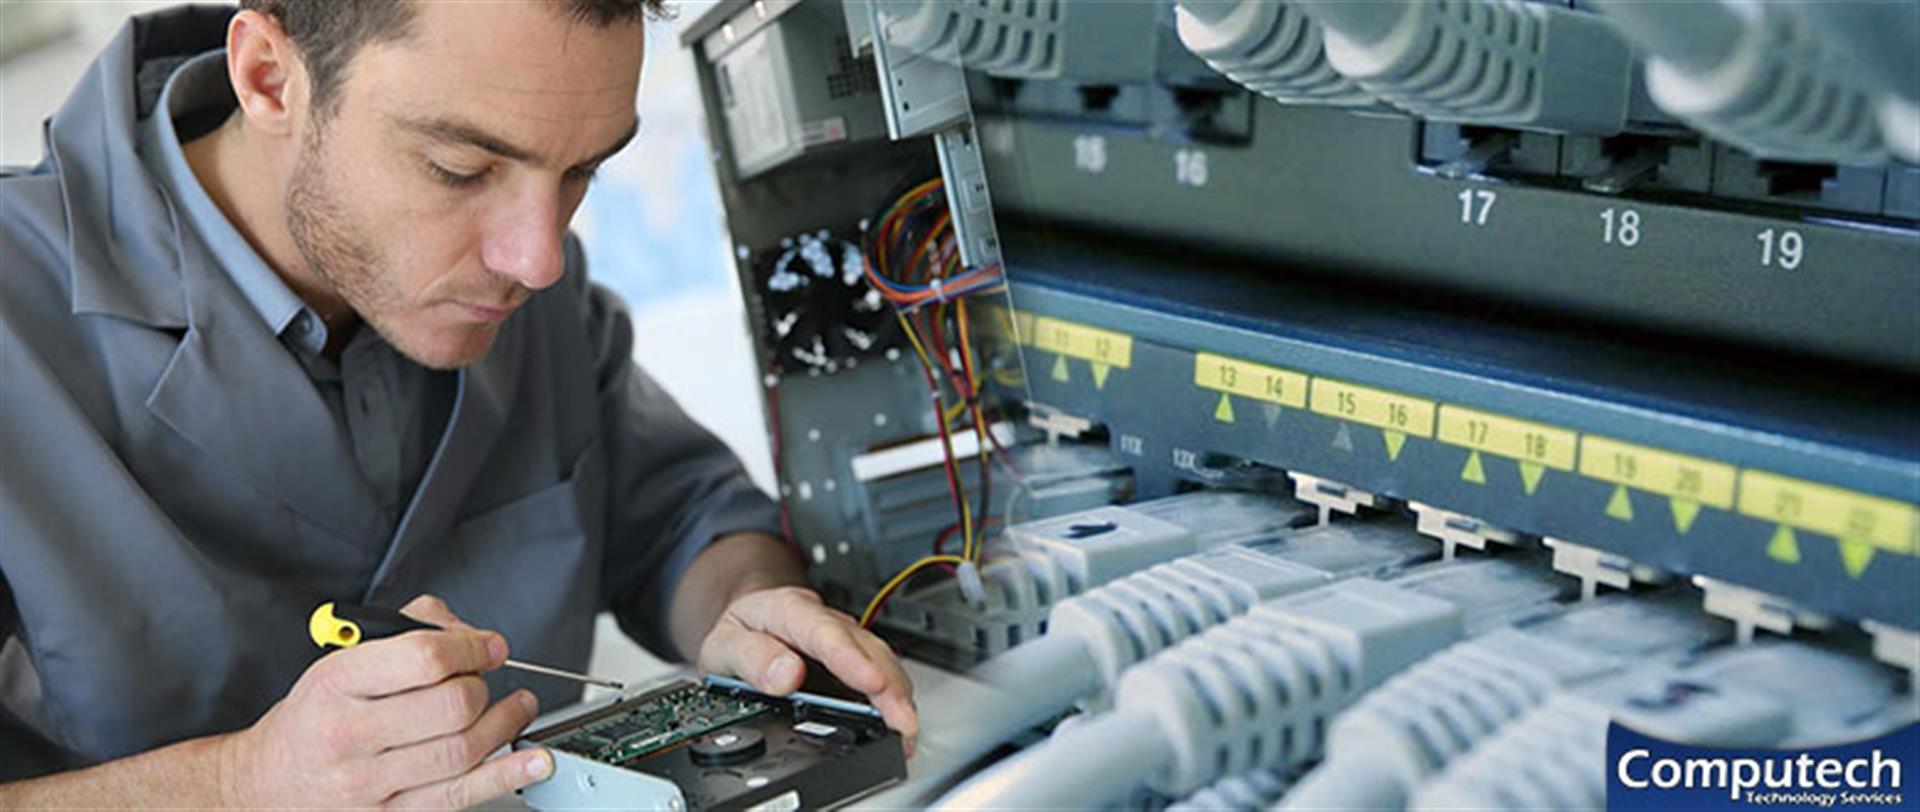 Madisonville Tennessee On-Site PC & Printer Repairs, Networking, Voice & Data Cabling Services